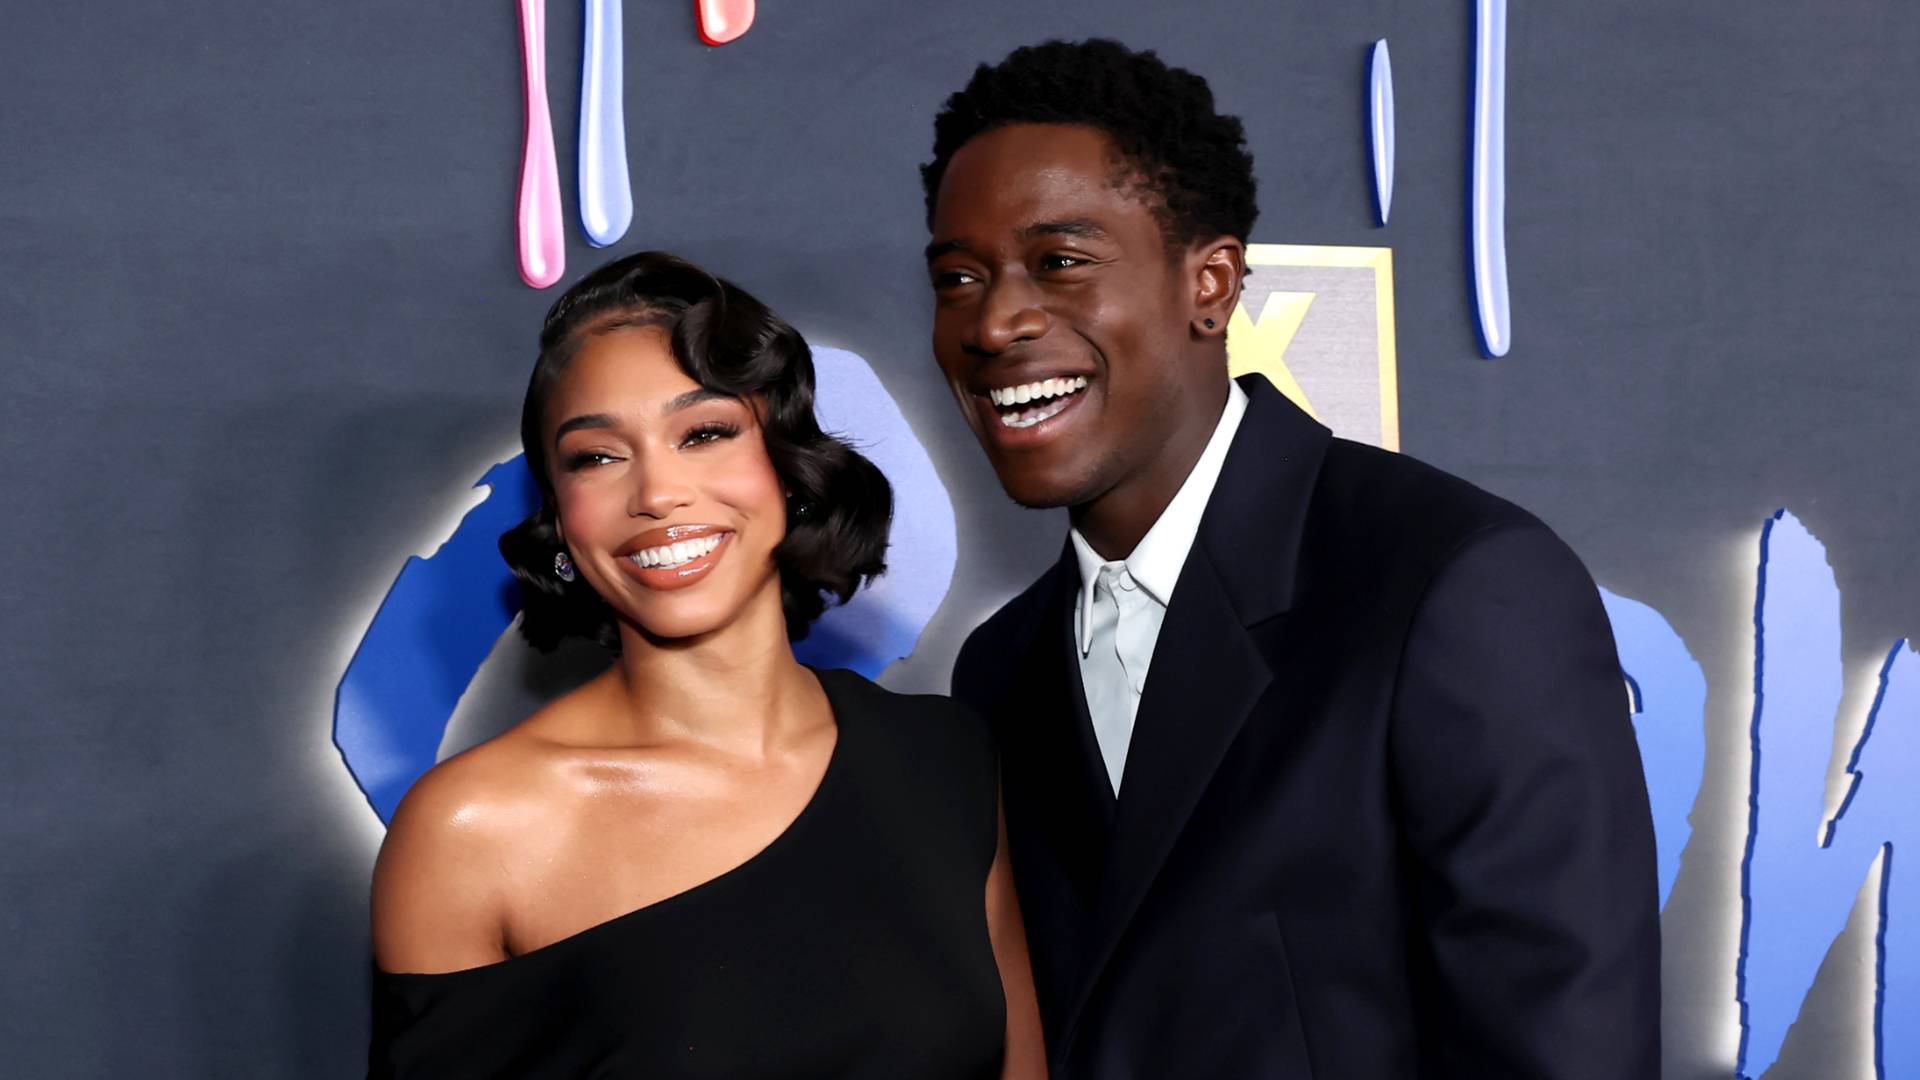 Lori Harvey and Damson Idris attend the Red Carpet Premiere Event for the Sixth and Final Season of FX's "Snowfall" at Academy Museum of Motion Pictures, Ted Mann Theater on February 15, 2023 in Los Angeles, California. 